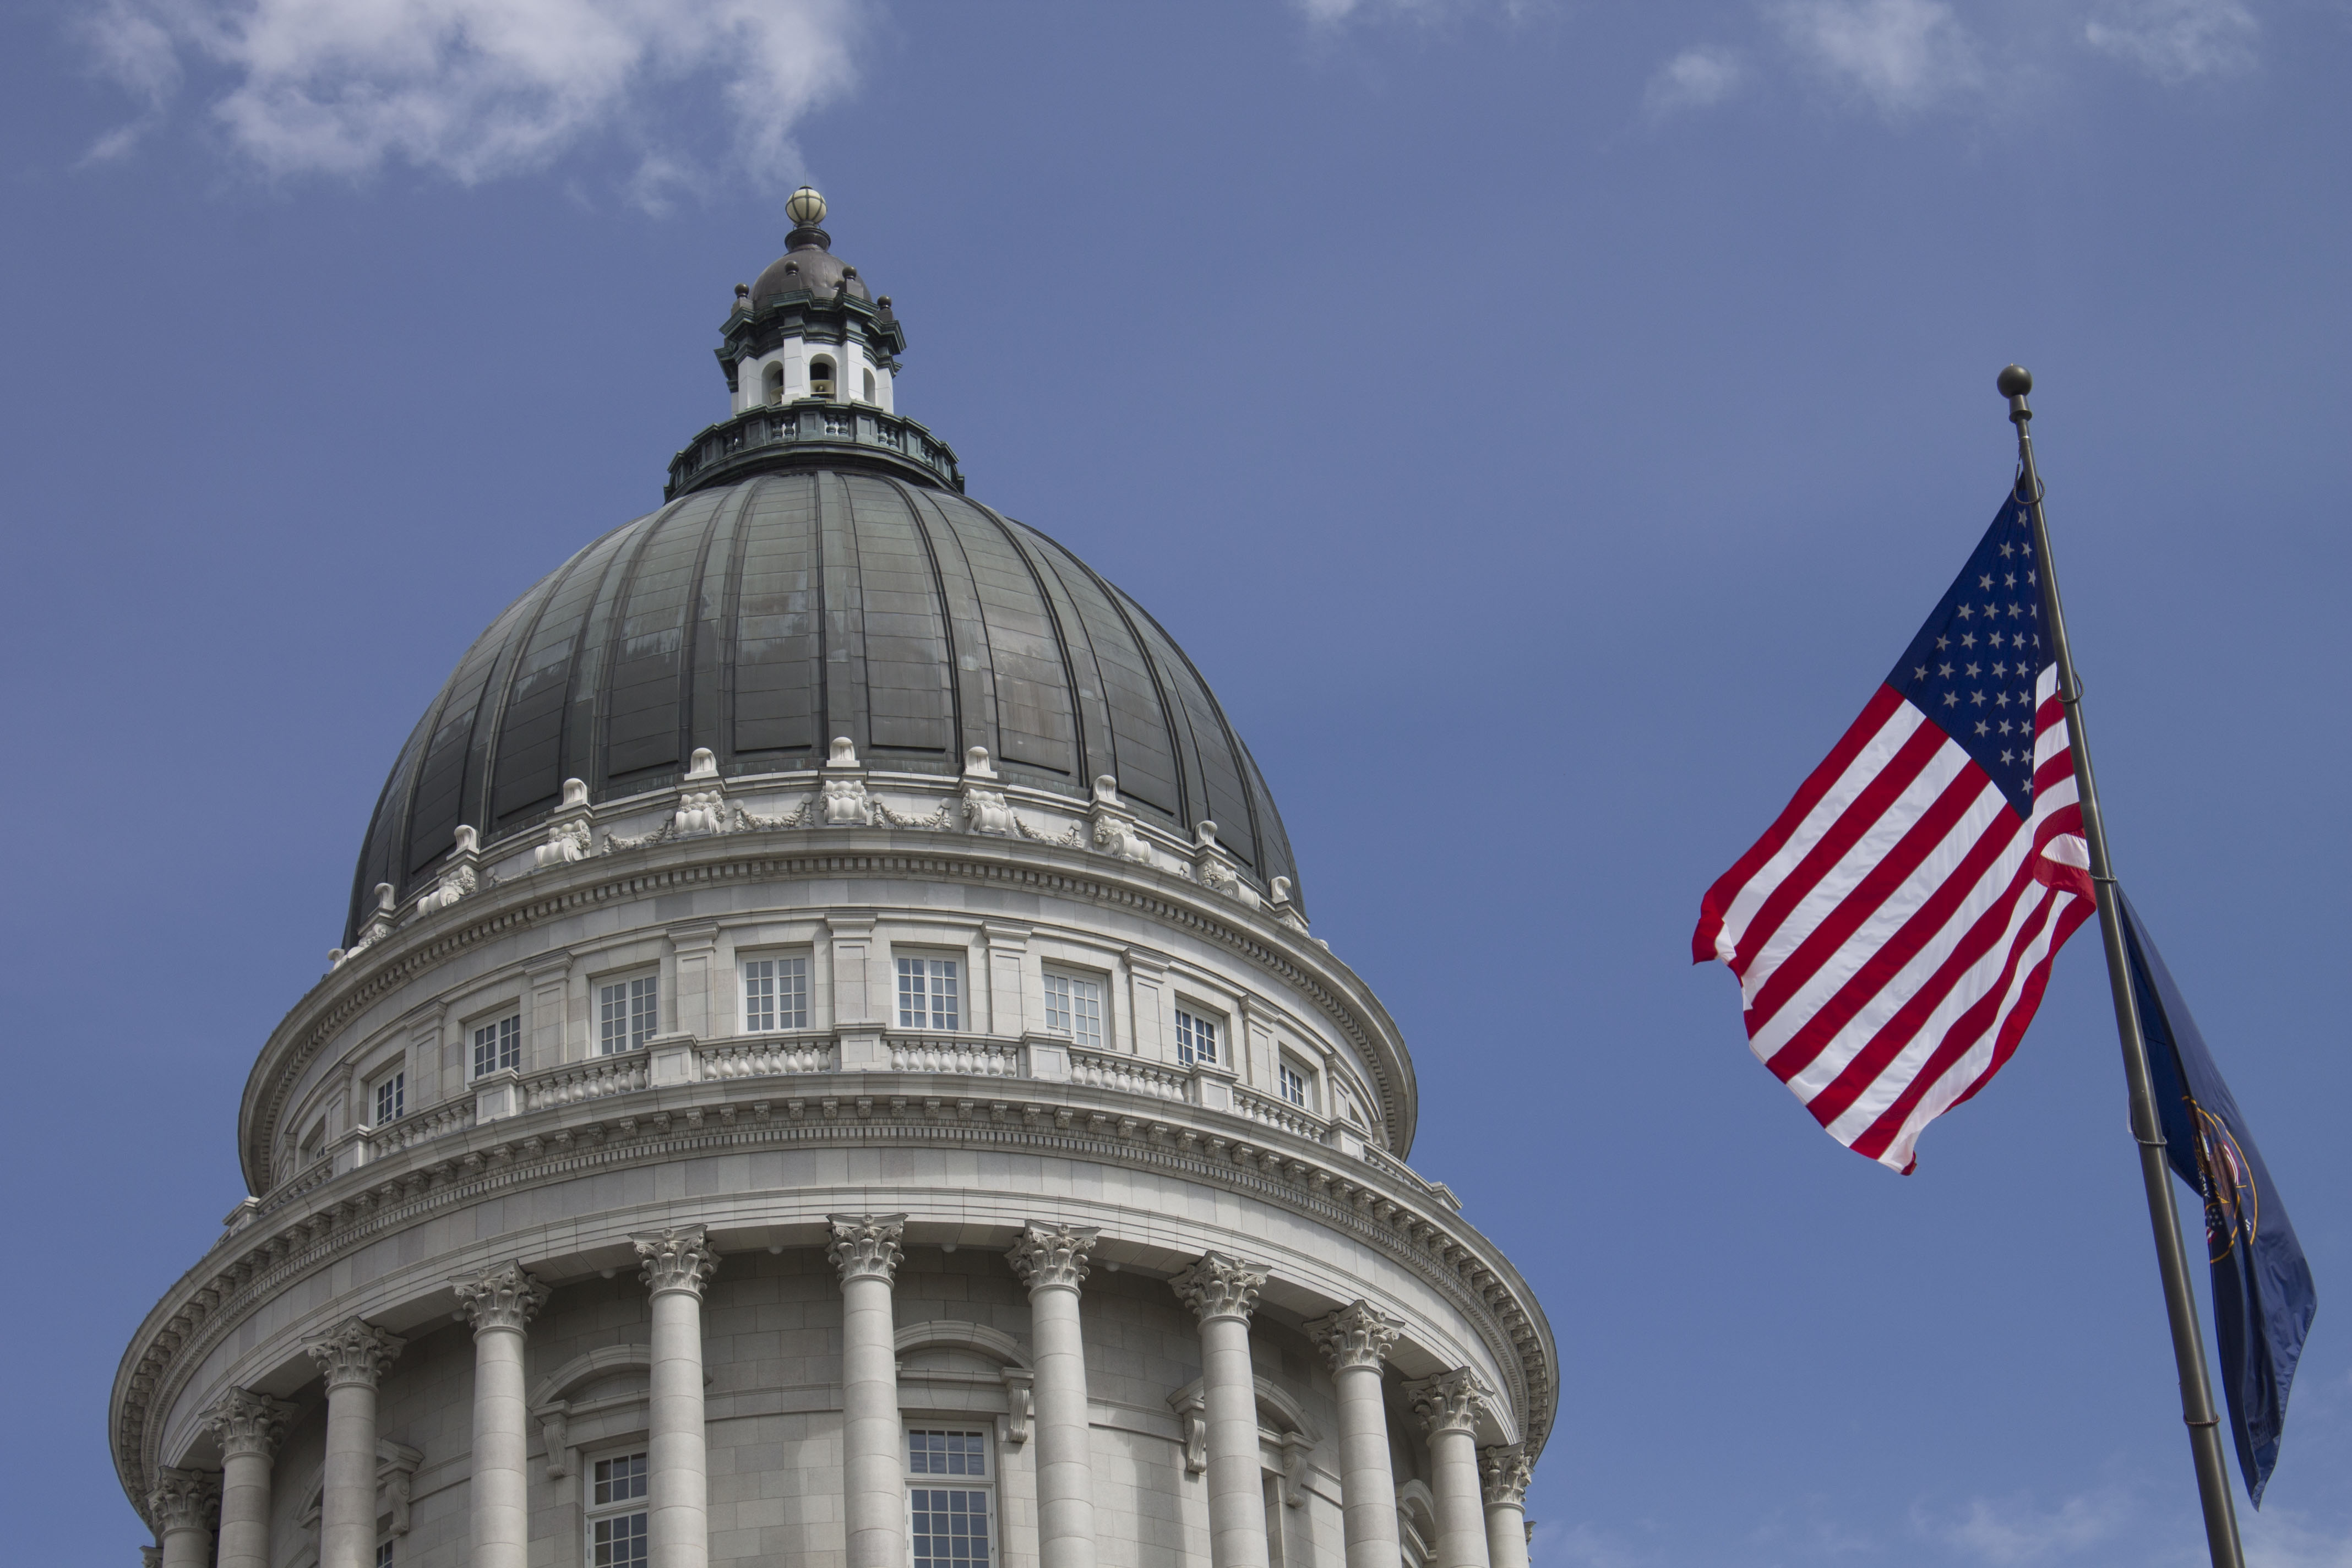 The American flag flies above the Utah State Capitol Building in Salt Lake City, Utah. The Utah Legislature is one of the more conservative state legislatures in the country. (Porter Chelson)